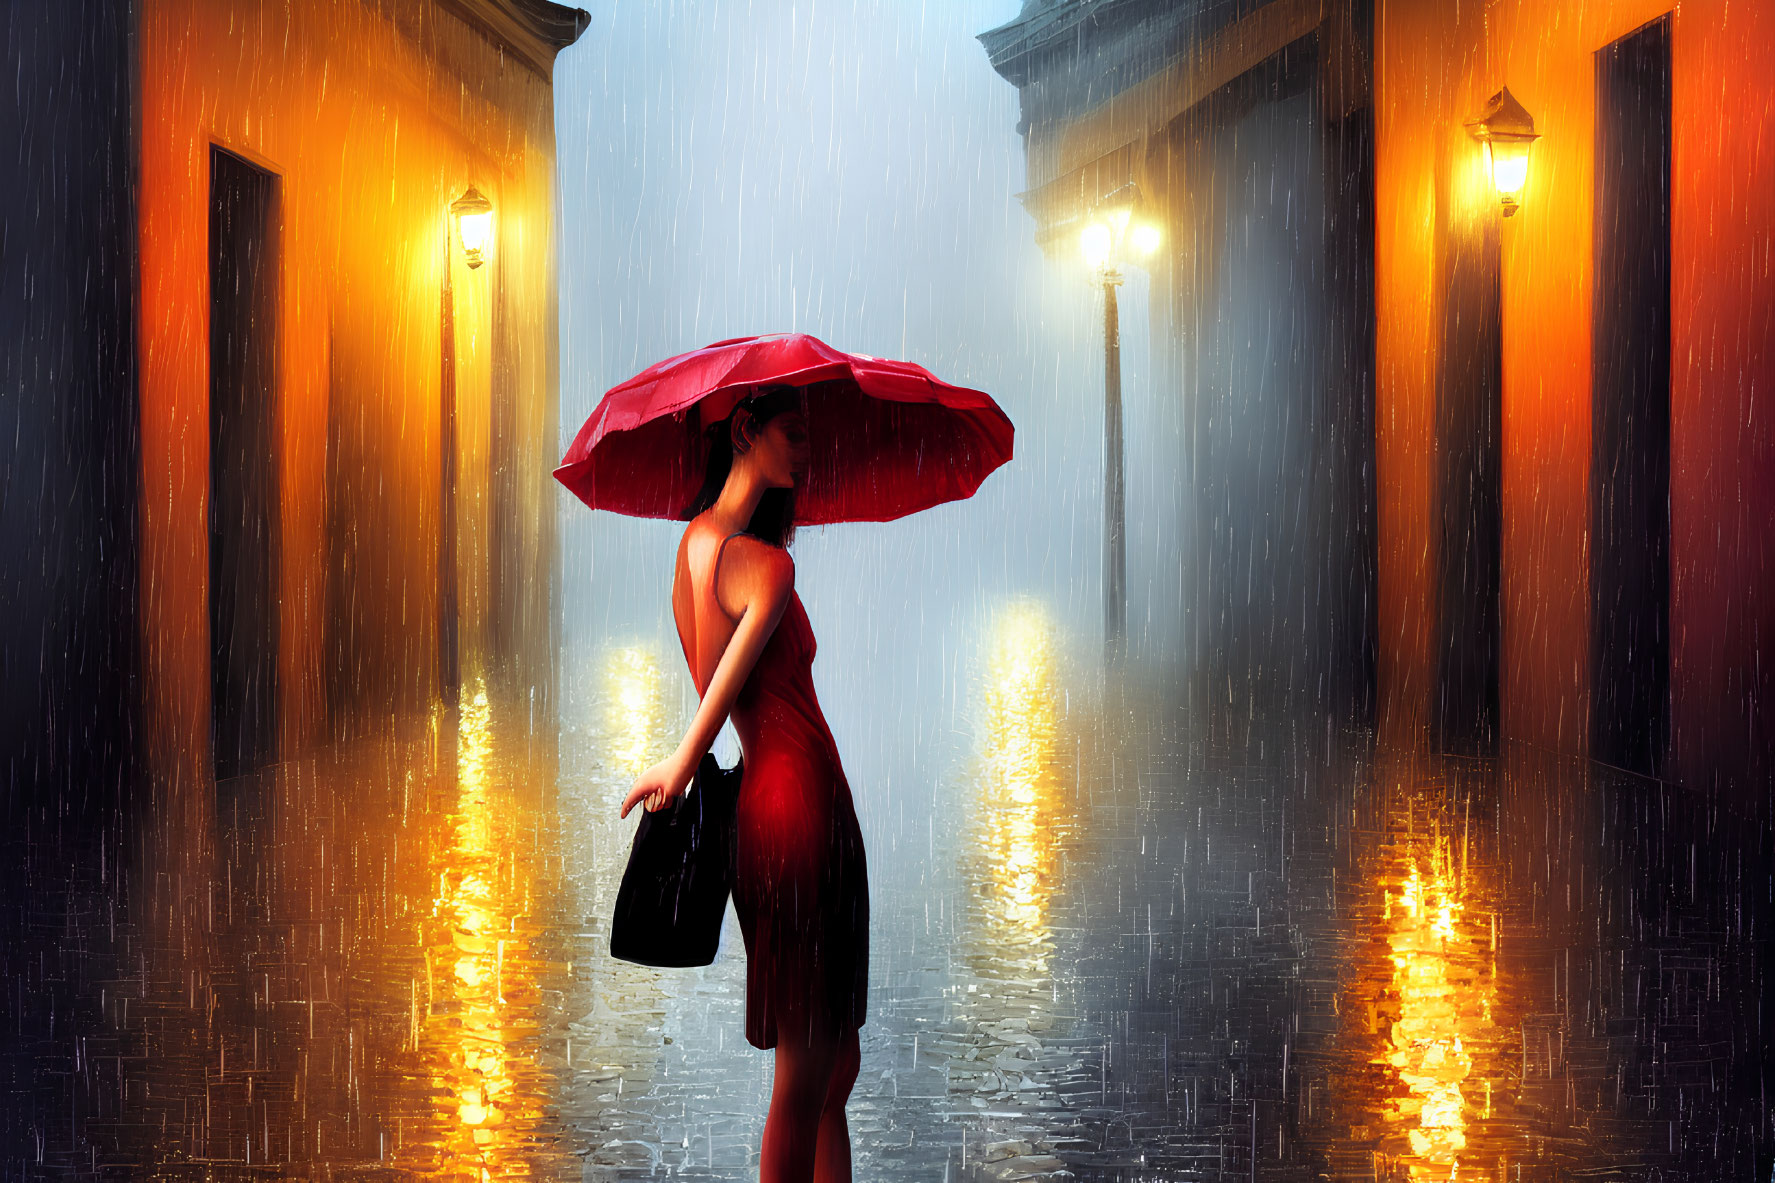 Person in red dress with umbrella walking on rainy cobblestone street